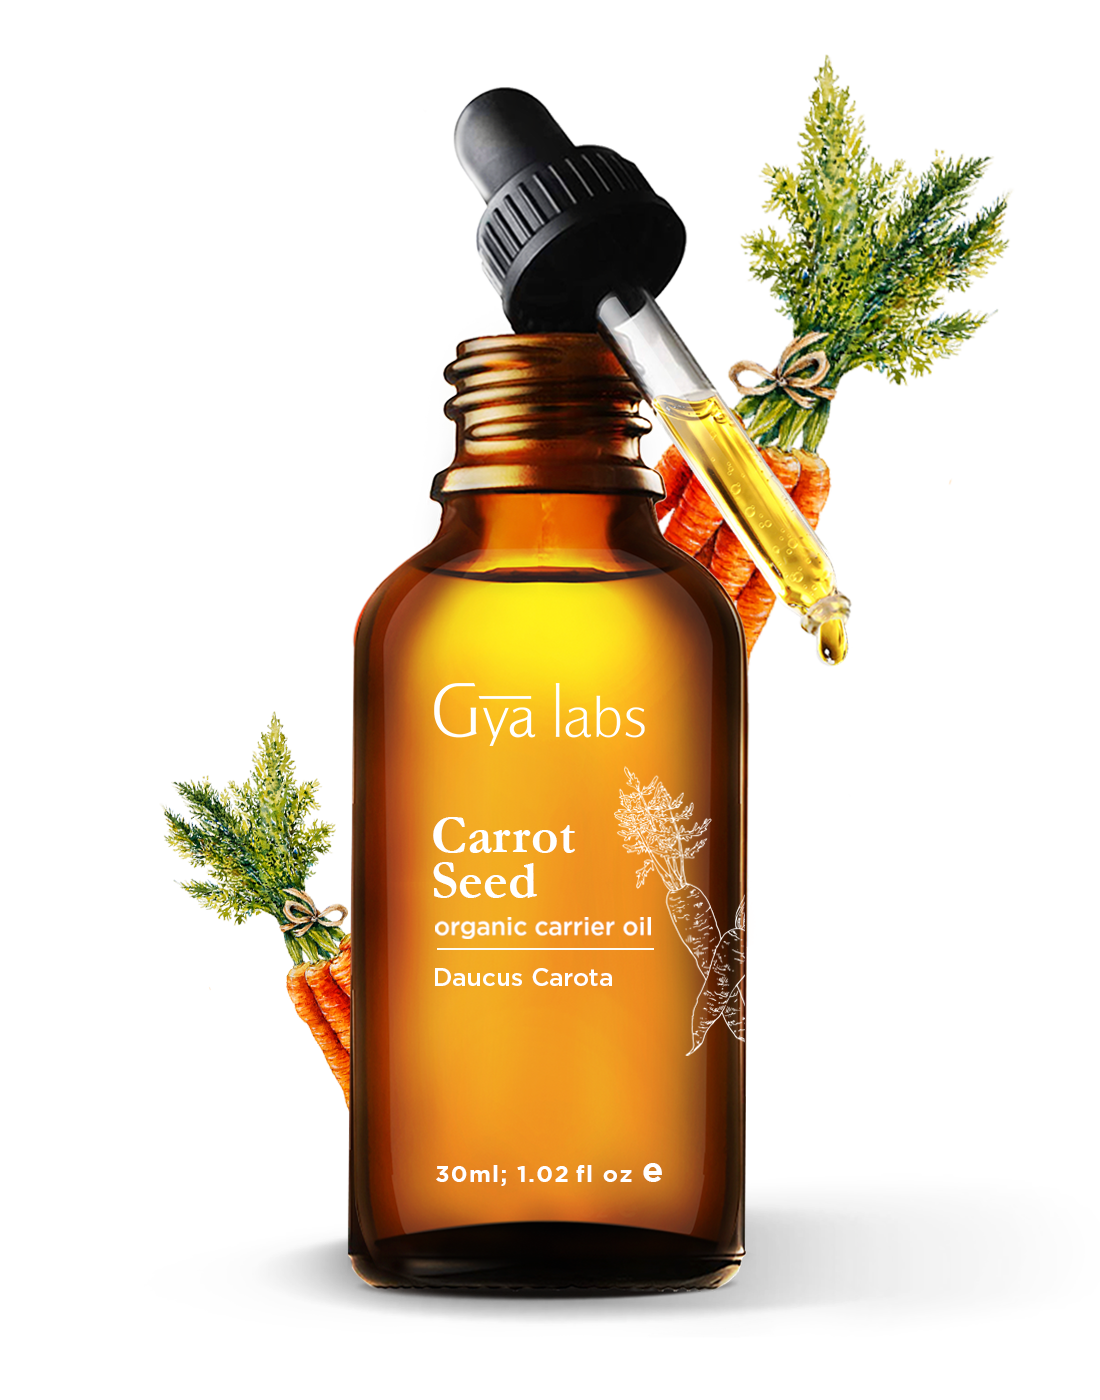 glass dropper filled with organic carrot seed carrier oil kept above bottle